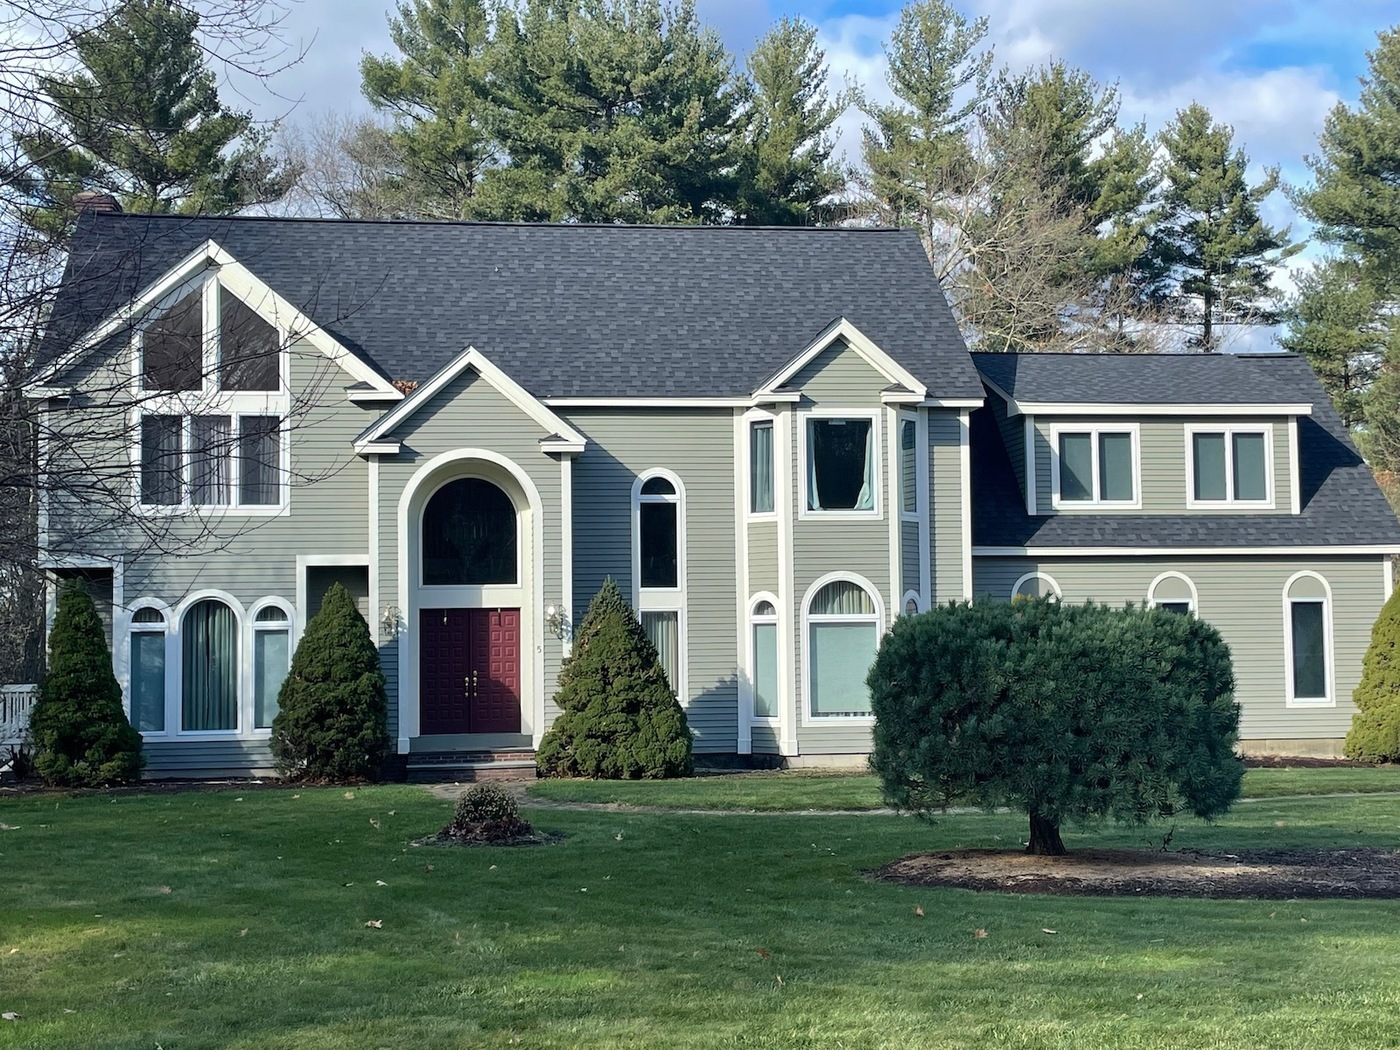 Aurora Exterior Painting is a premier residential house painting company based in Massachusetts.